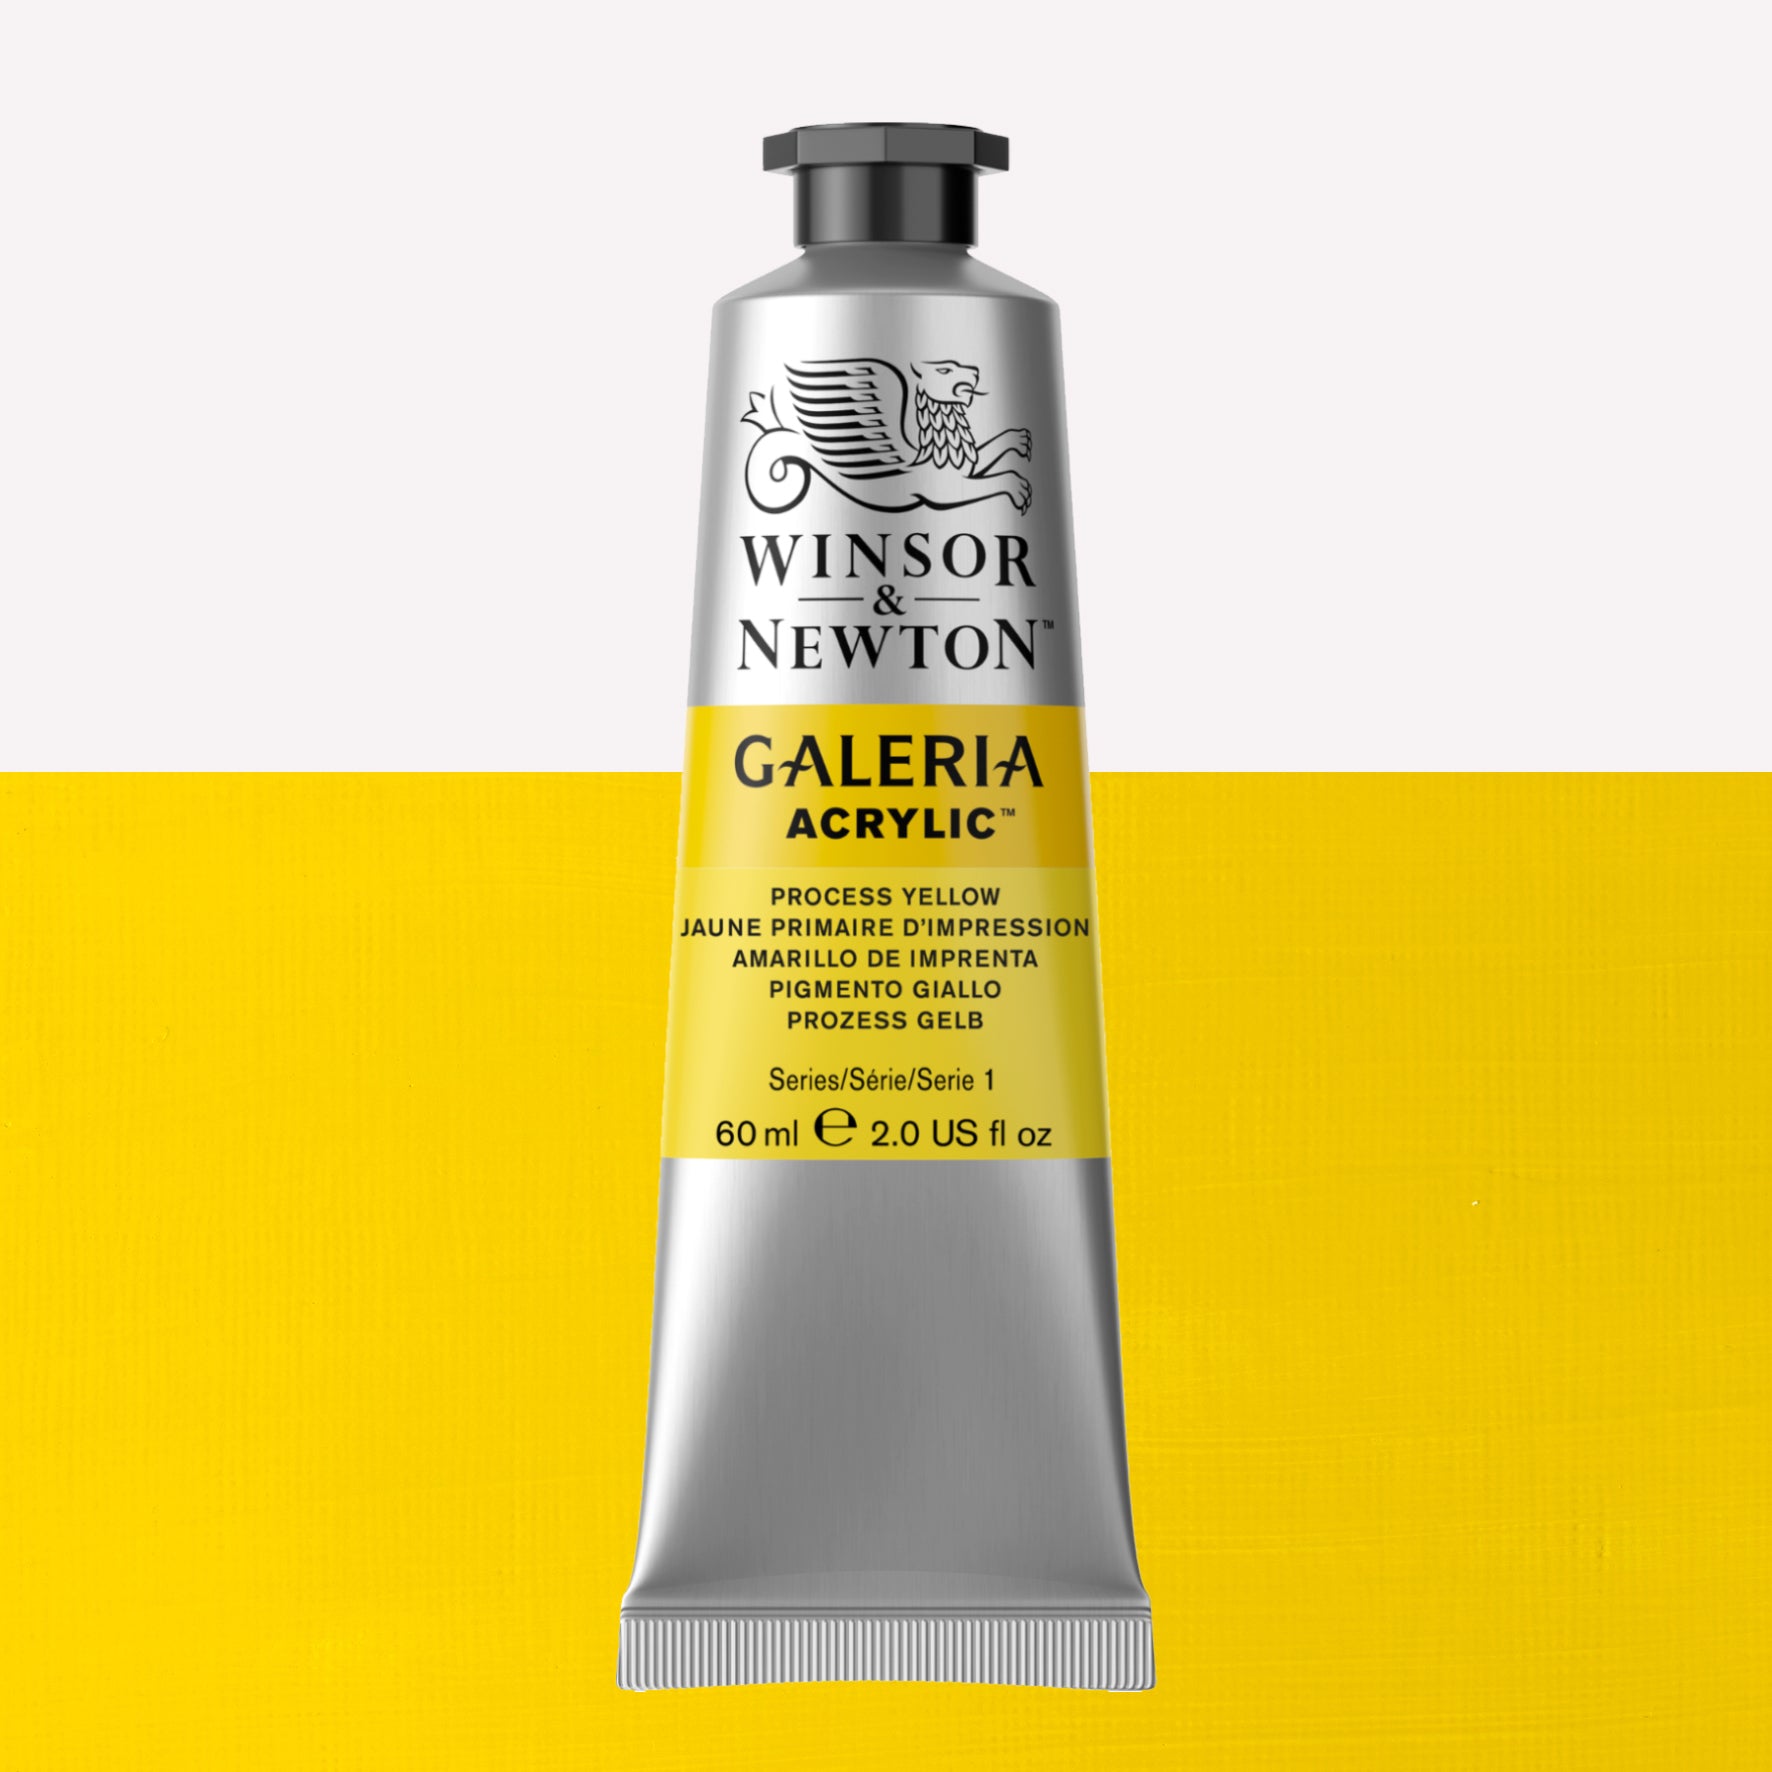 A 60ml tube of vibrant Galeria Acrylic paint in the shade Process Yellow. This professional-quality paint is packaged in a silver tube with a black lid. Made by Winsor and Newton.